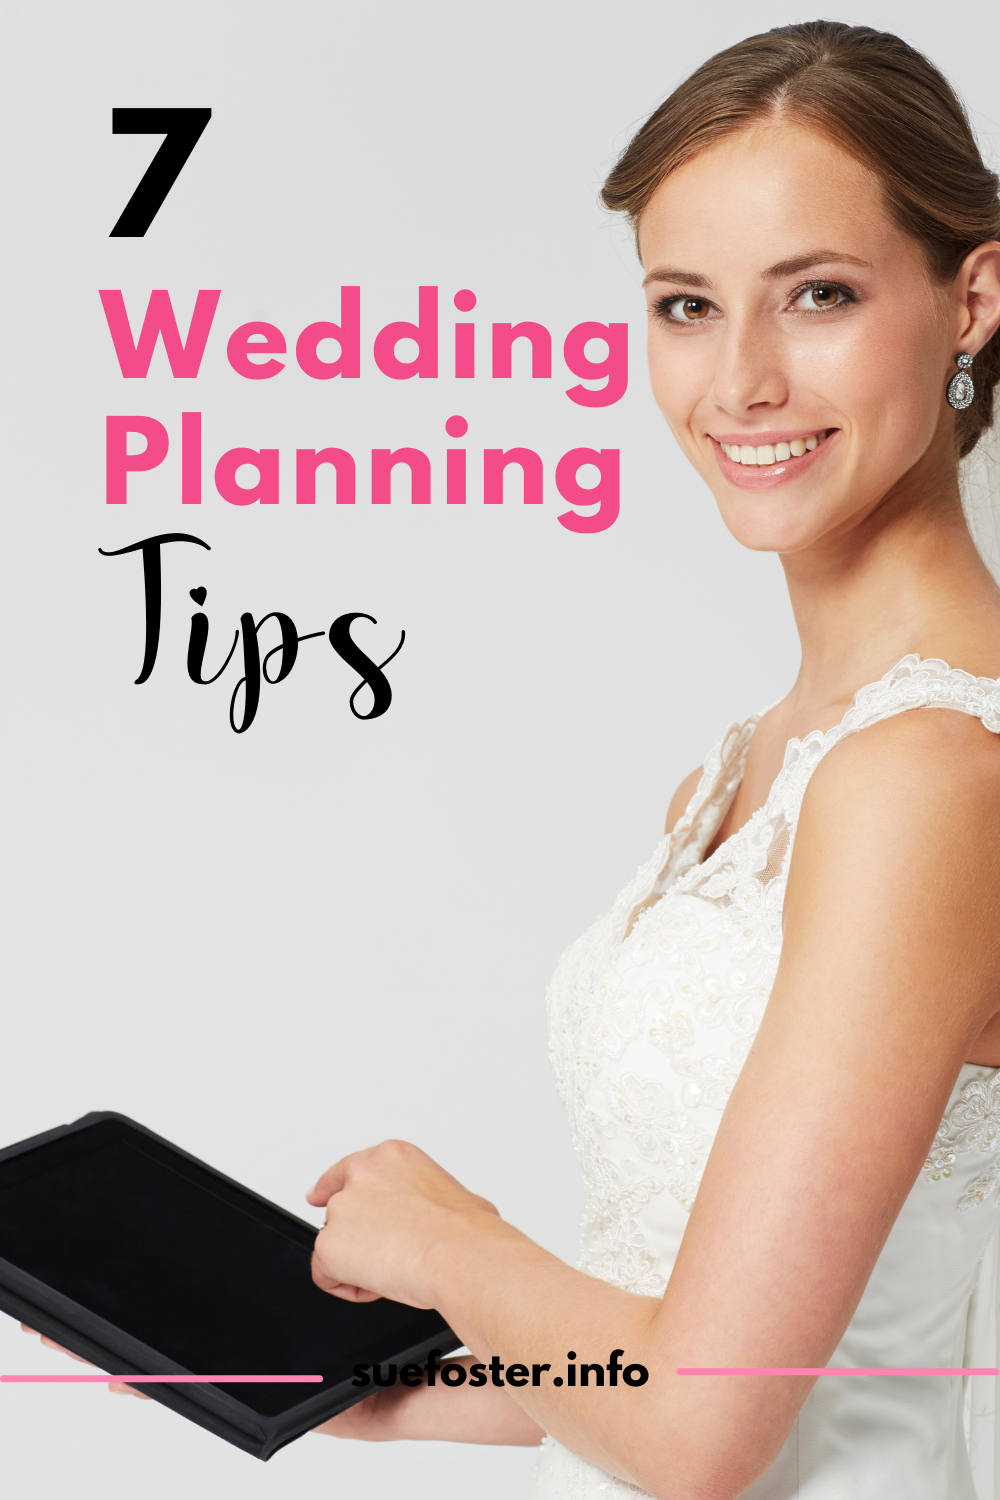 There is nothing more fulfilling than tying the knot. But before taking the plunge, there are plenty of considerations to make. Find out what to consider for your big day. Read on to get awesome wedding planning tips.